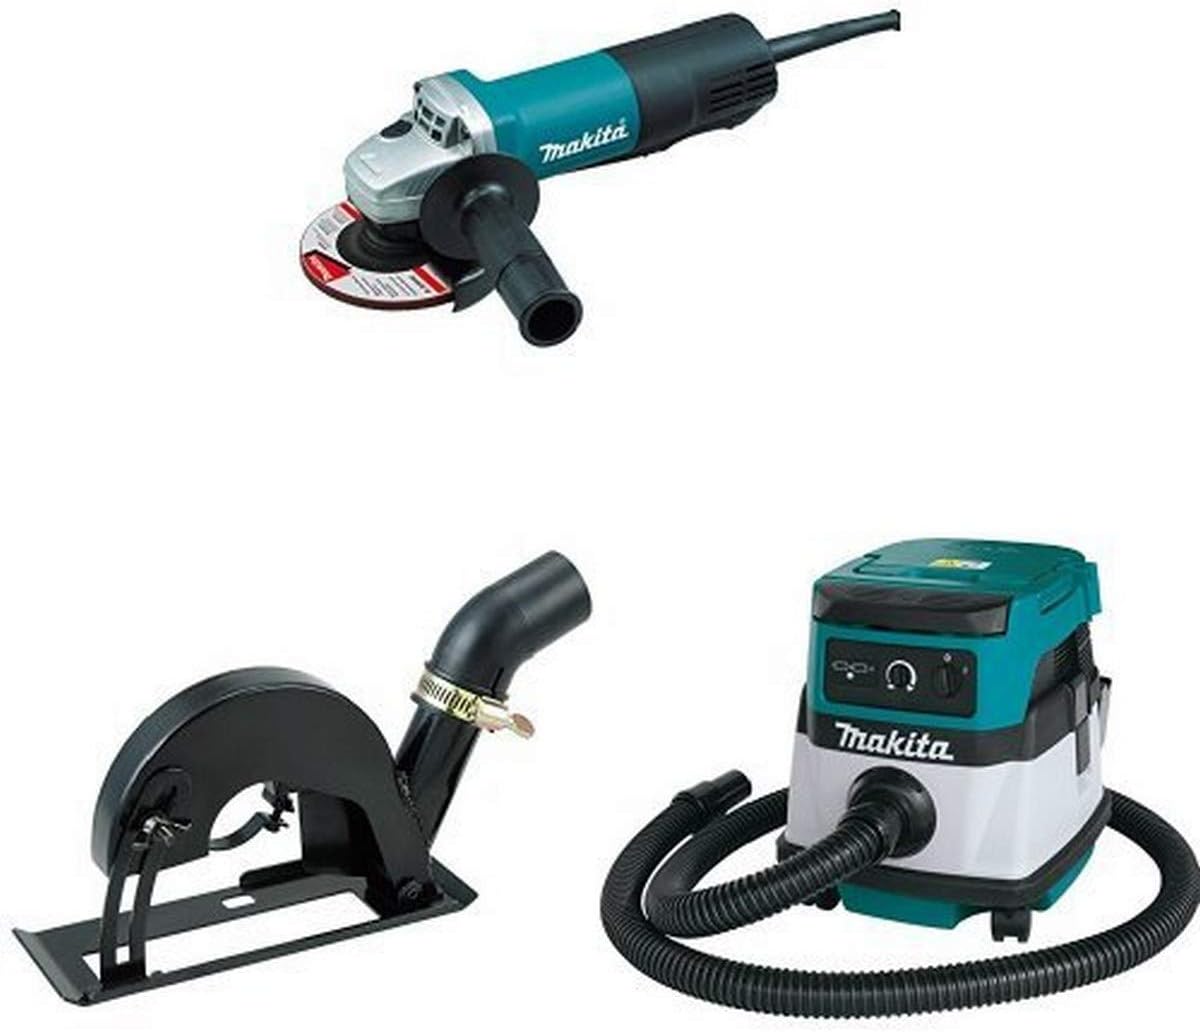 Makita 9557PB 4-1/2-Inch Paddle Switch Angle Grinder, with AC/DC Switch, 193794-5 Dust Extraction Cutting Guard,  XCV04Z 18V X2 LXT (36V) 2.1 Gallon HEPA Filter Dry Dust Extractor/Vacuum